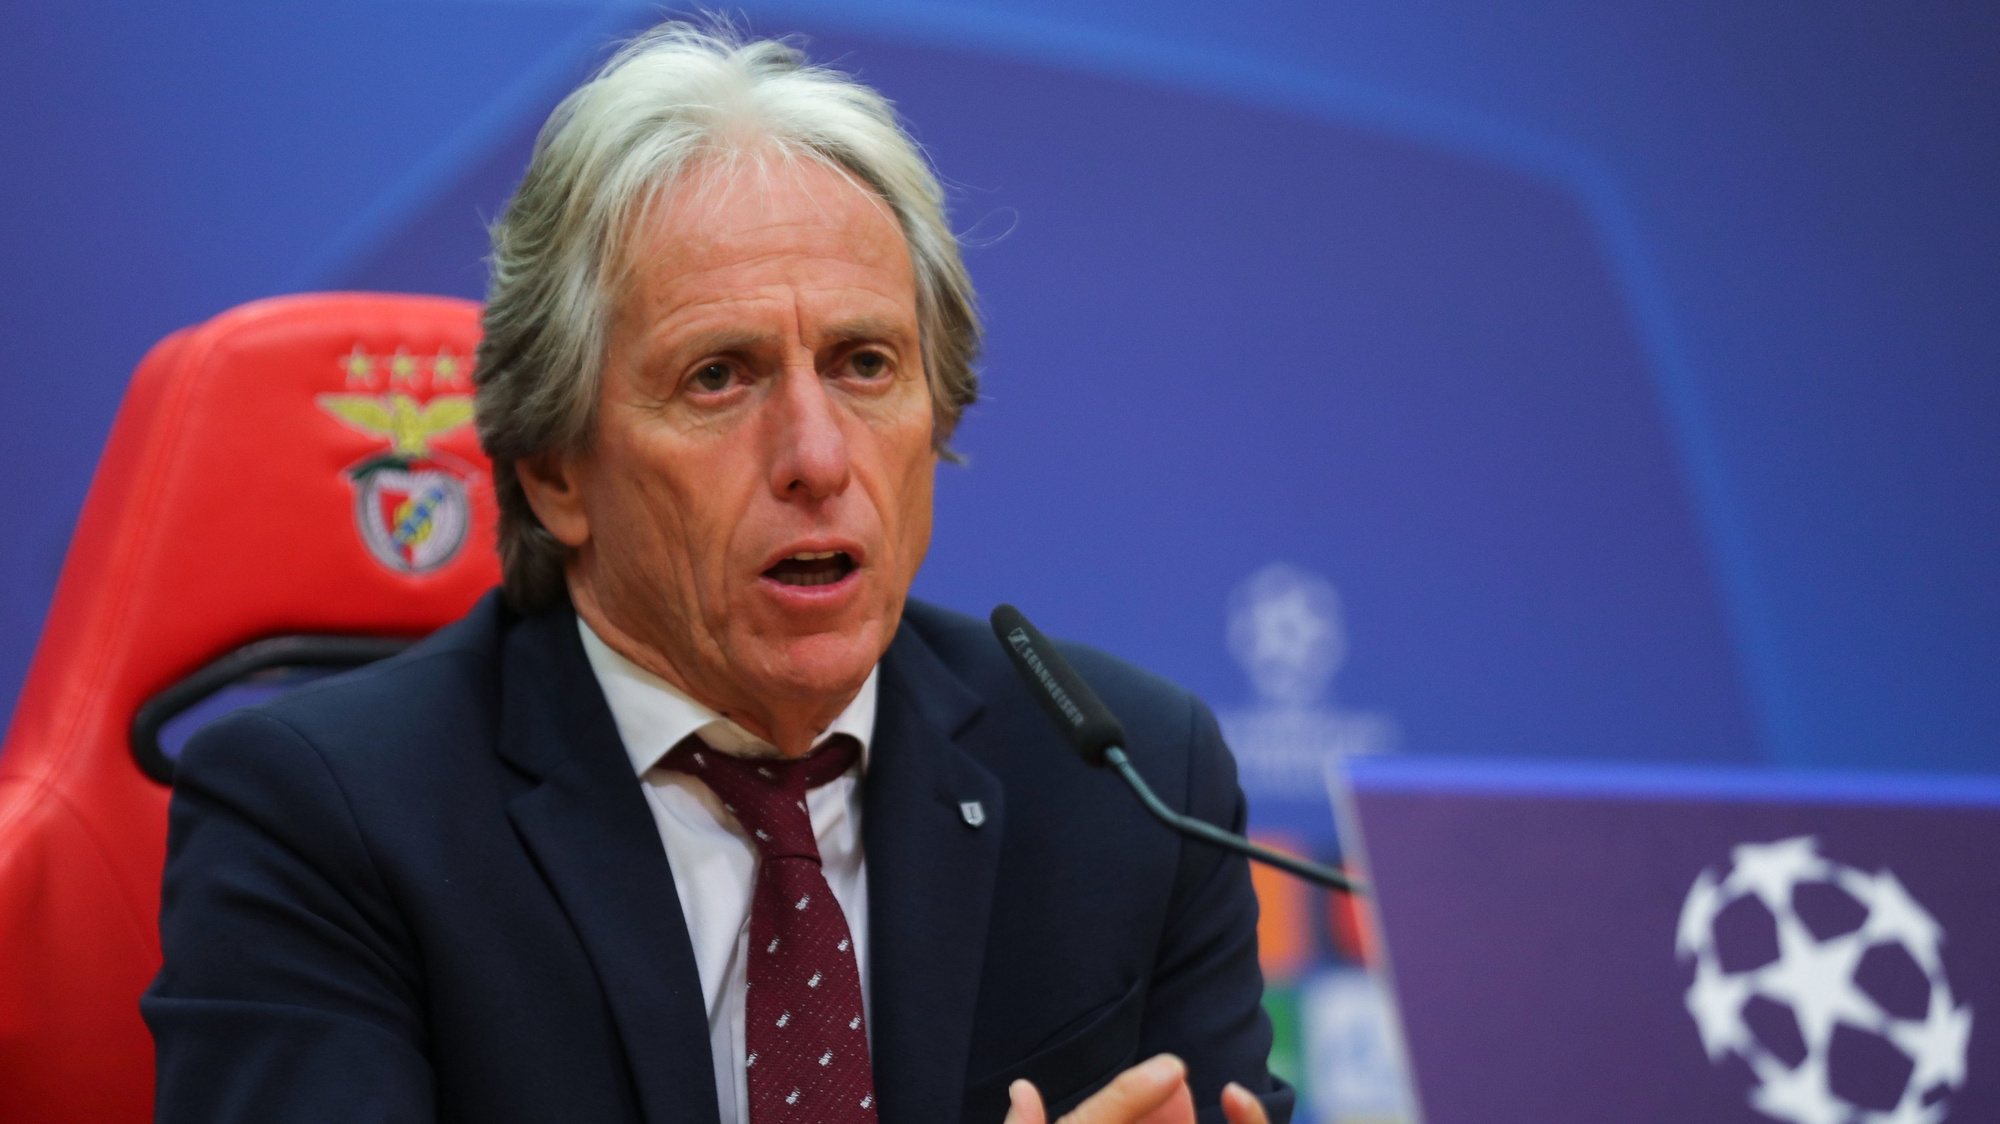 Benfica&#039;s head coach Jorge Jesus attends a press conference at Benfica Campus in Seixal, outskirts of Lisbon, Portugal, 22 November 2021. Benfica will face Barcelona in their UEFA Champions League group E soccer match on 23 November 2021. MIGUEL A. LOPES/LUSA